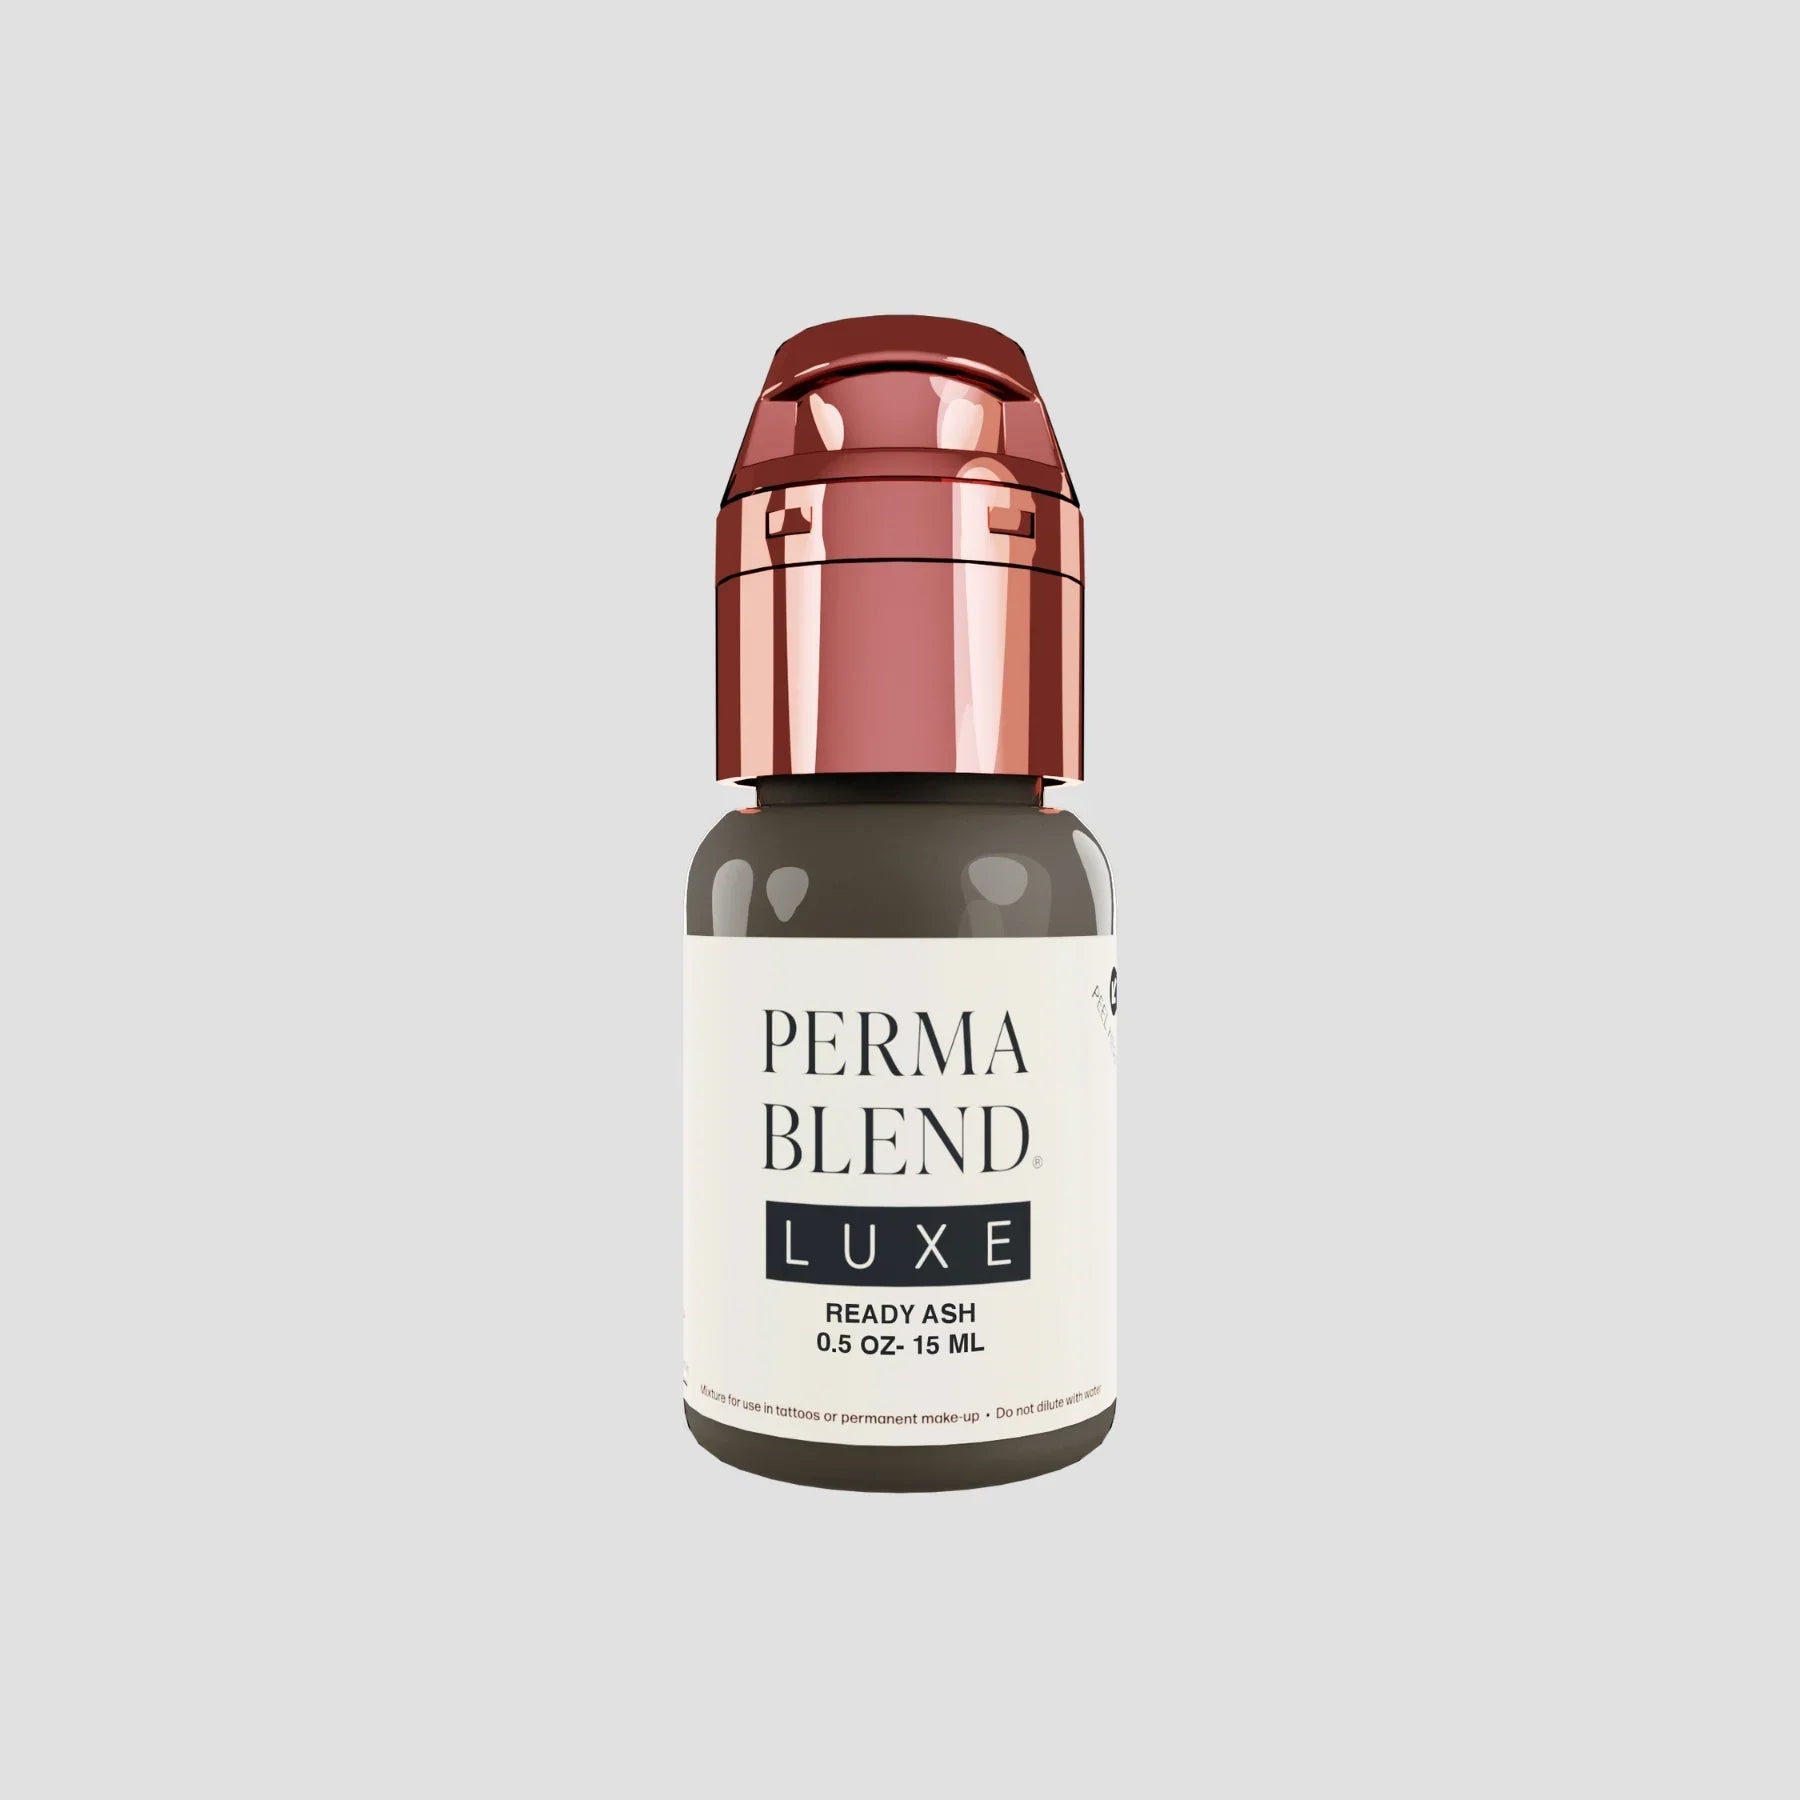 Perma Blend Luxe Ready-To-Go Pre-Modified Pigment Set by Perma Blend, Permanent Makeup Pigments, Pigments for Eyebrows, Microblading pigment, Ombre Powder Brow pigment, Ready Ash